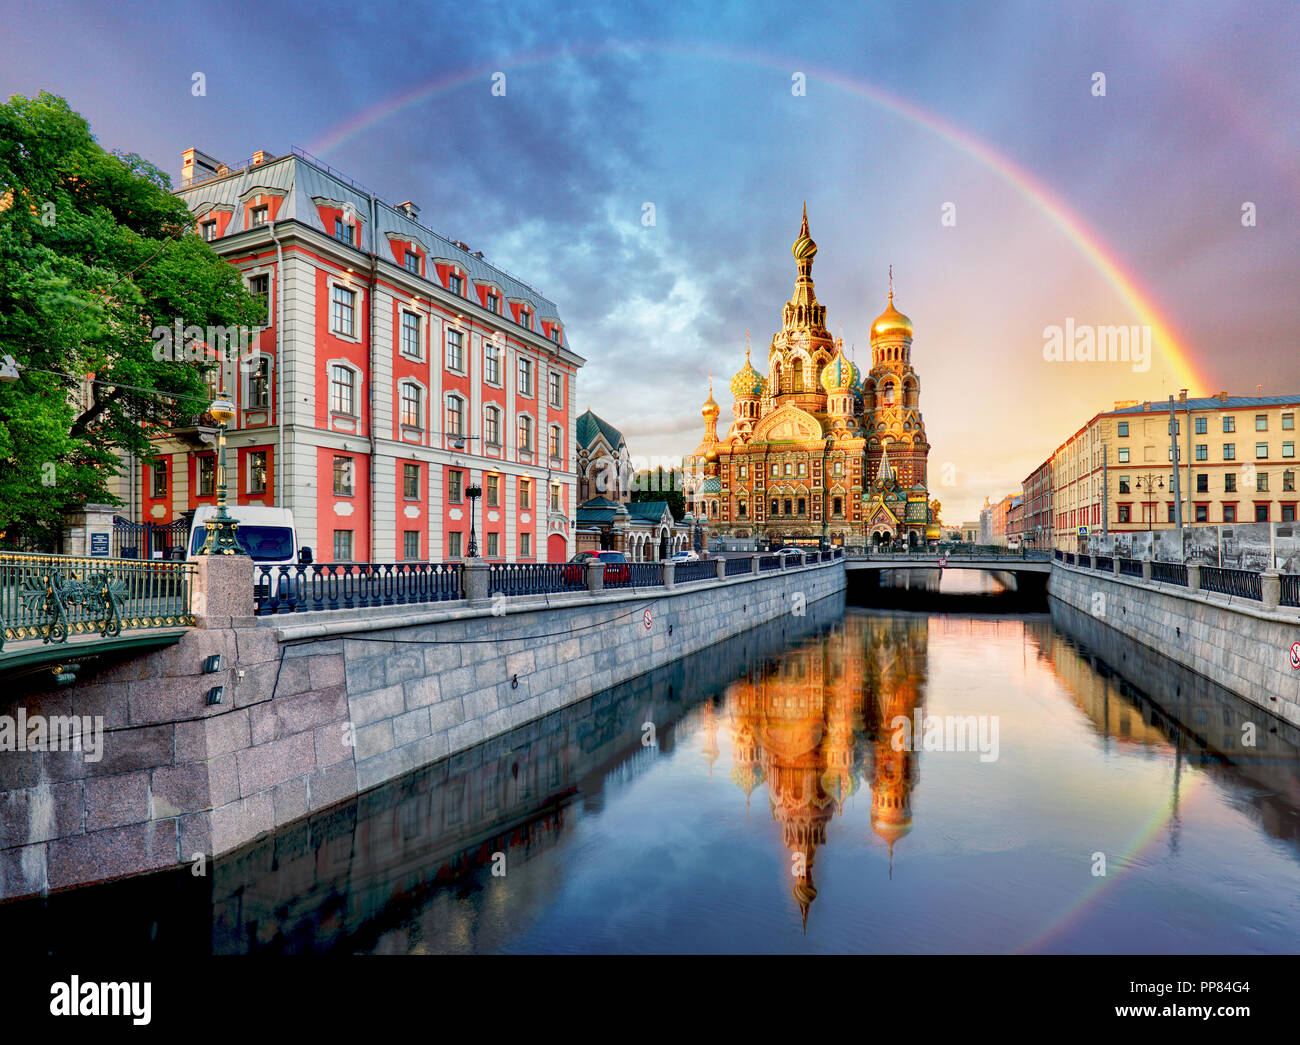 Russia, St. Petersburg - Church Saviour on Spilled Blood with rainbow Stock Photo